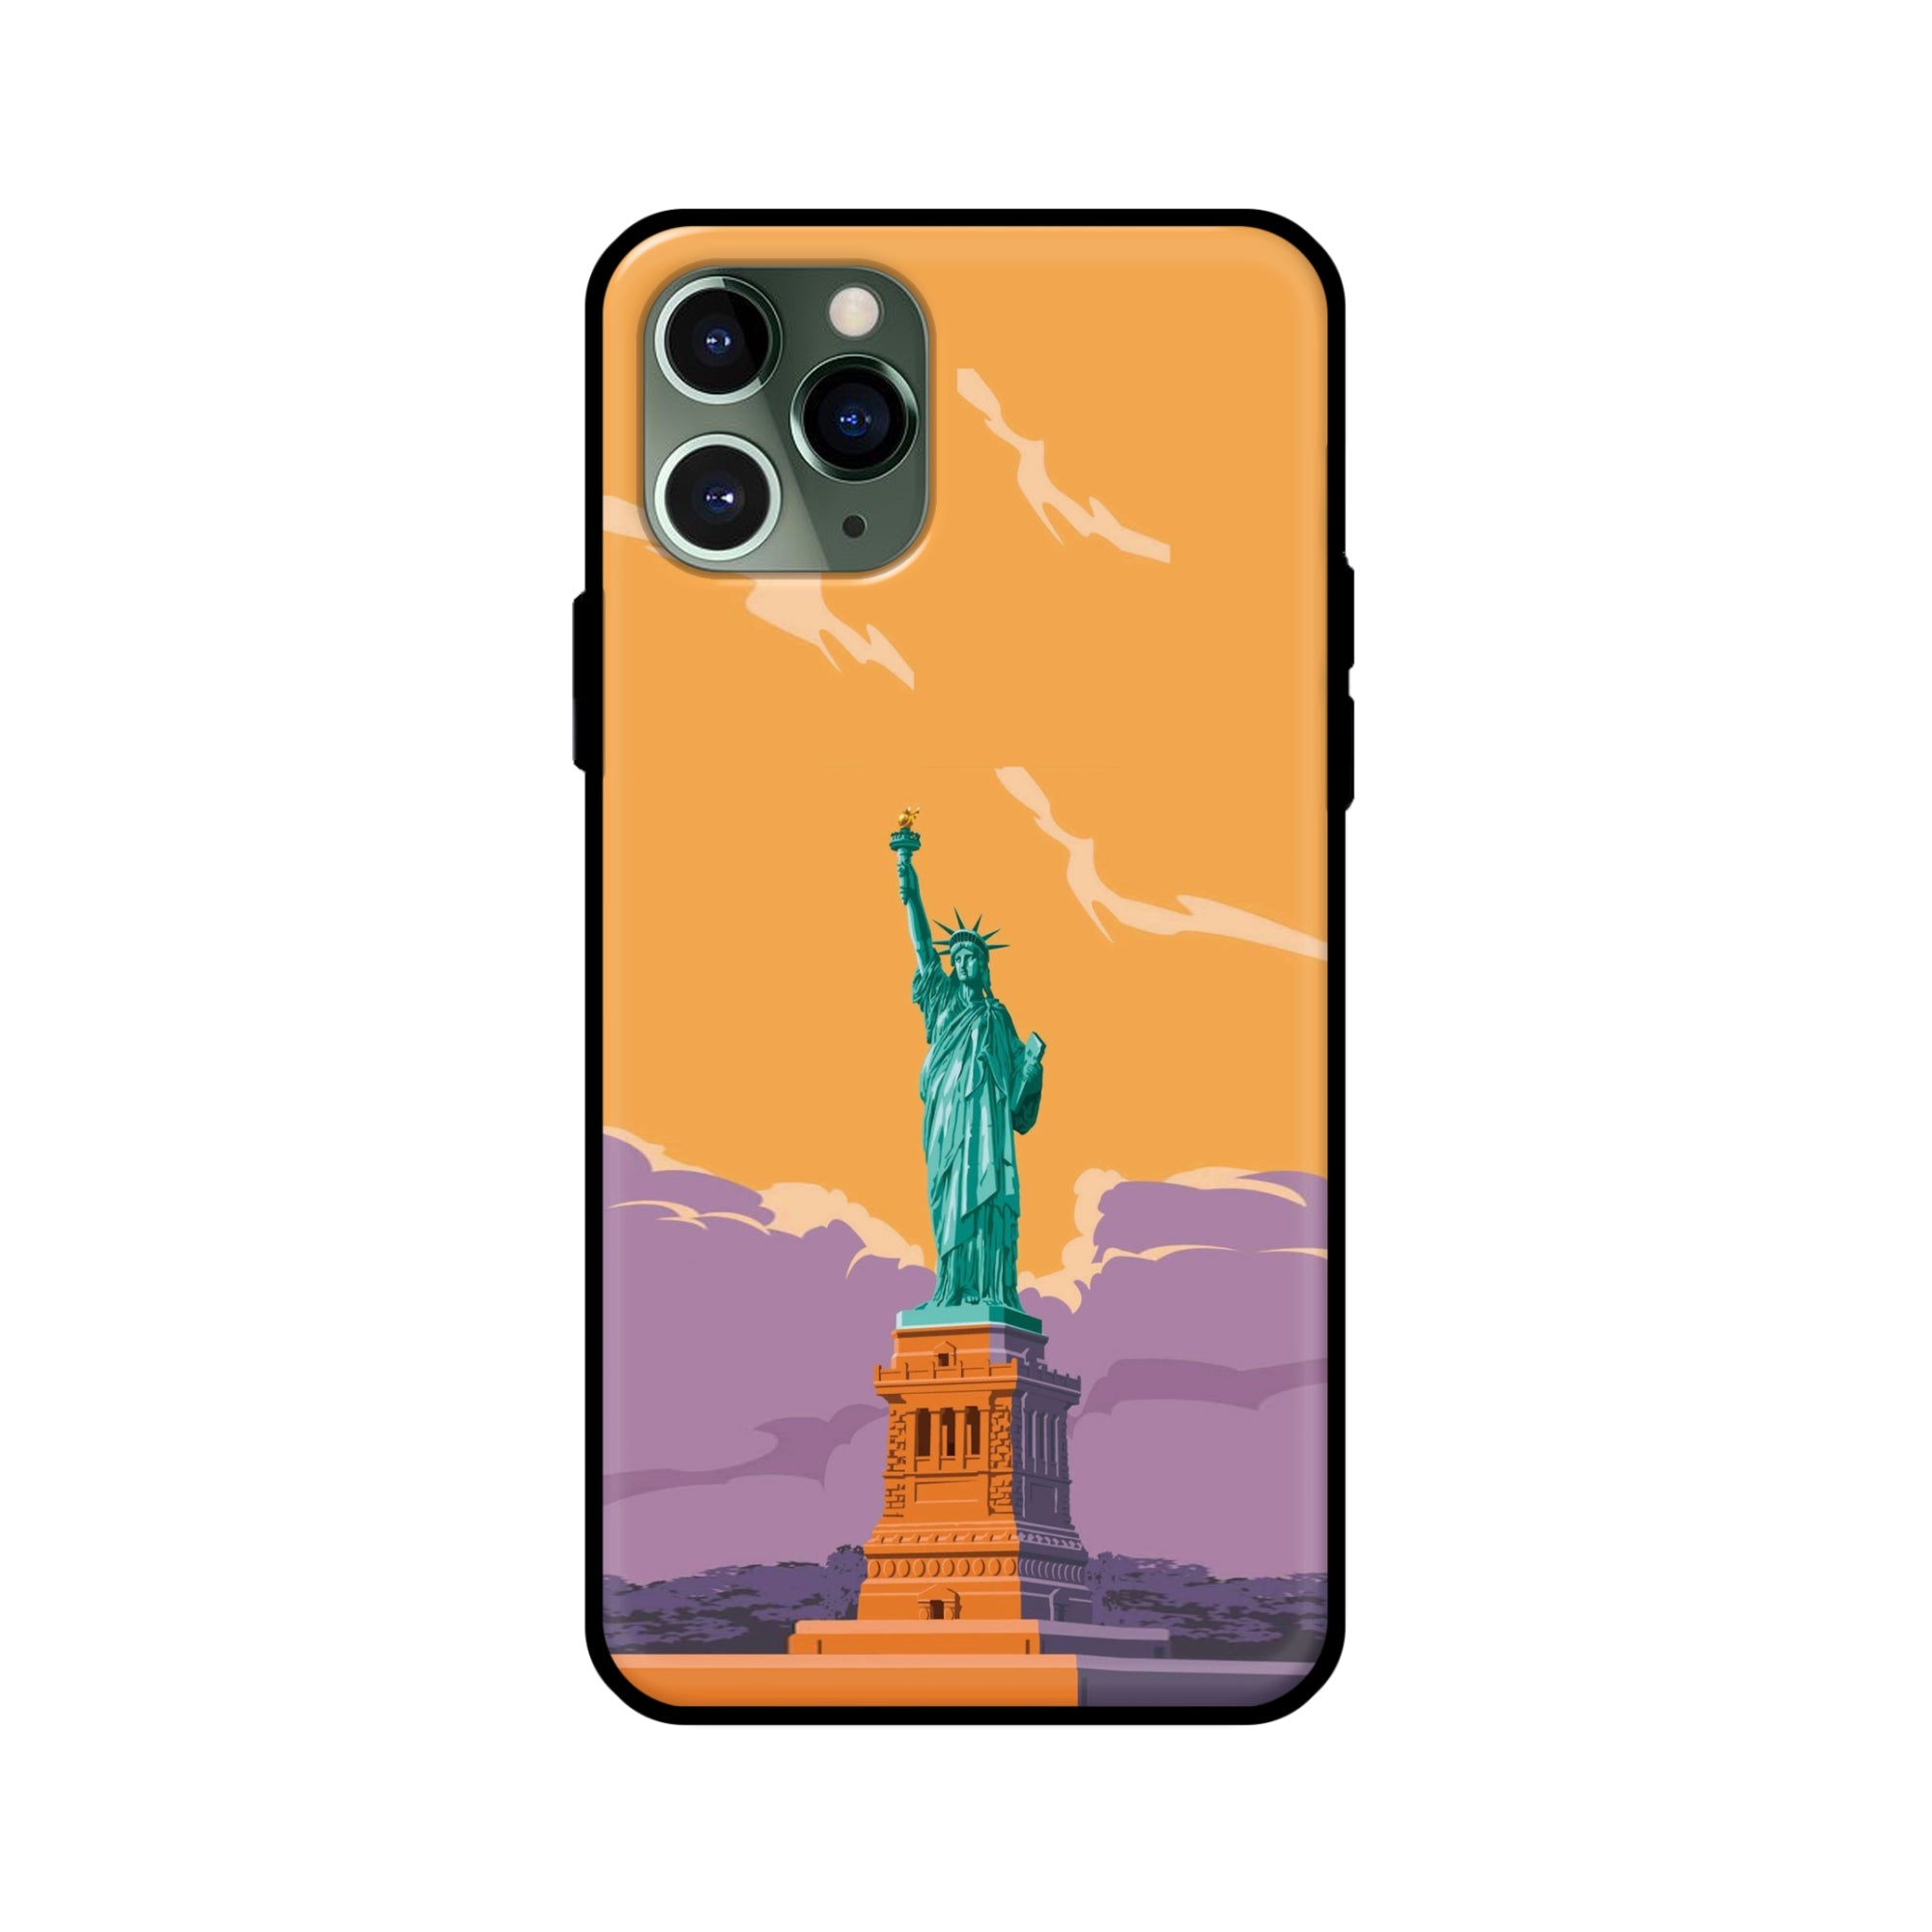 Buy Statue Of Liberty Glass/Metal Back Mobile Phone Case/Cover For iPhone 11 Pro Online